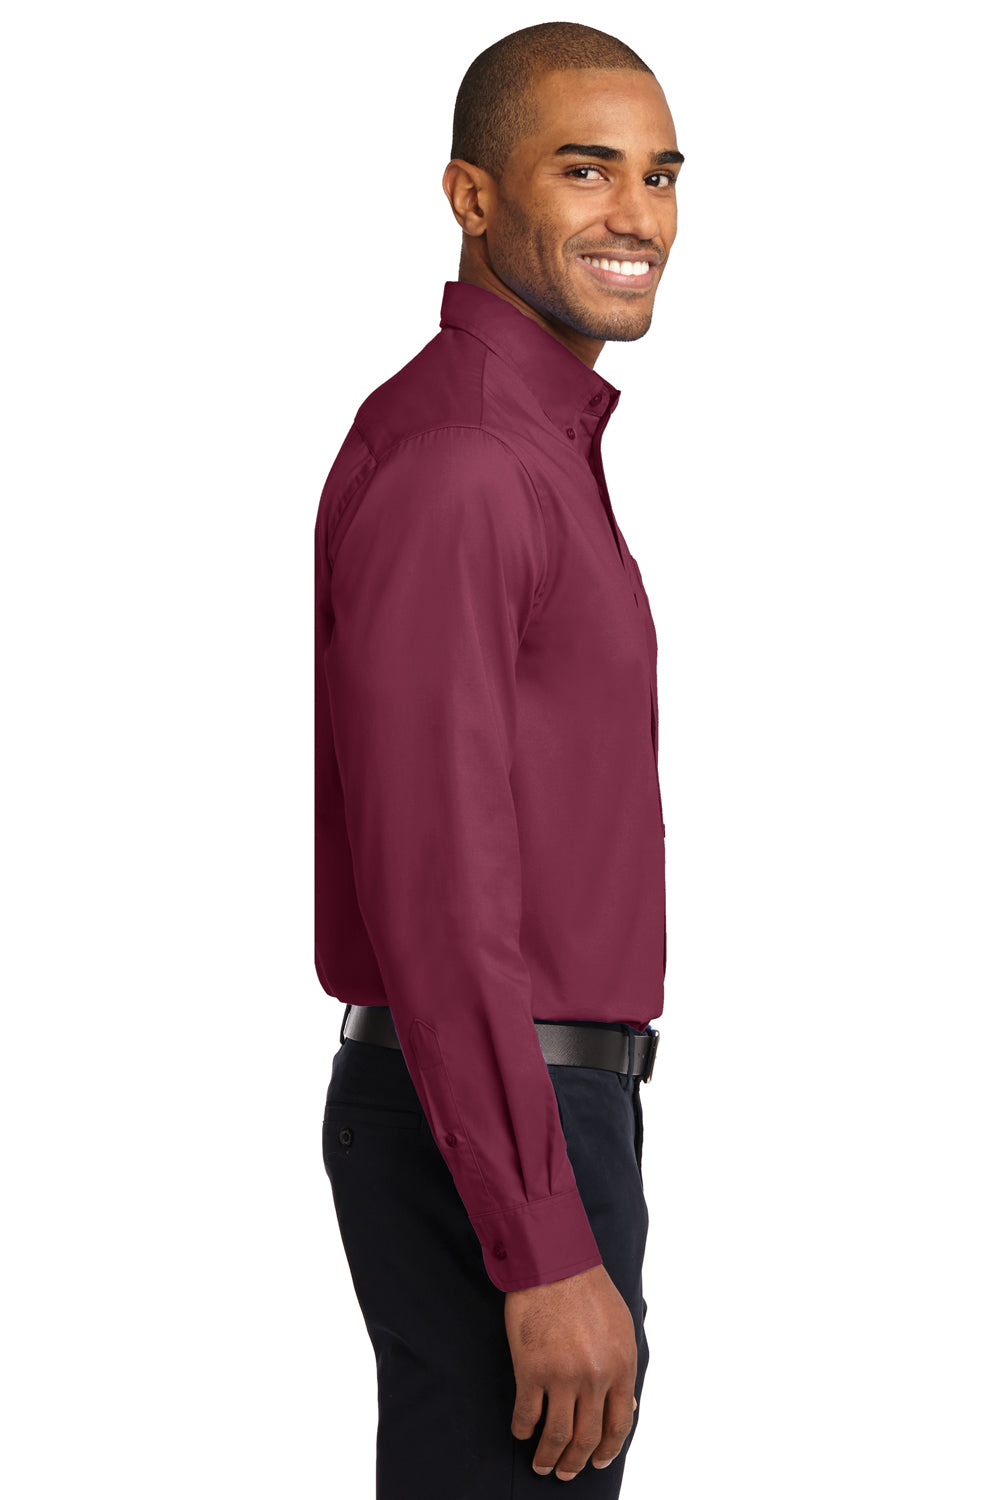 Port Authority S608/TLS608/S608ES Mens Easy Care Wrinkle Resistant Long Sleeve Button Down Shirt w/ Pocket Burgundy Side